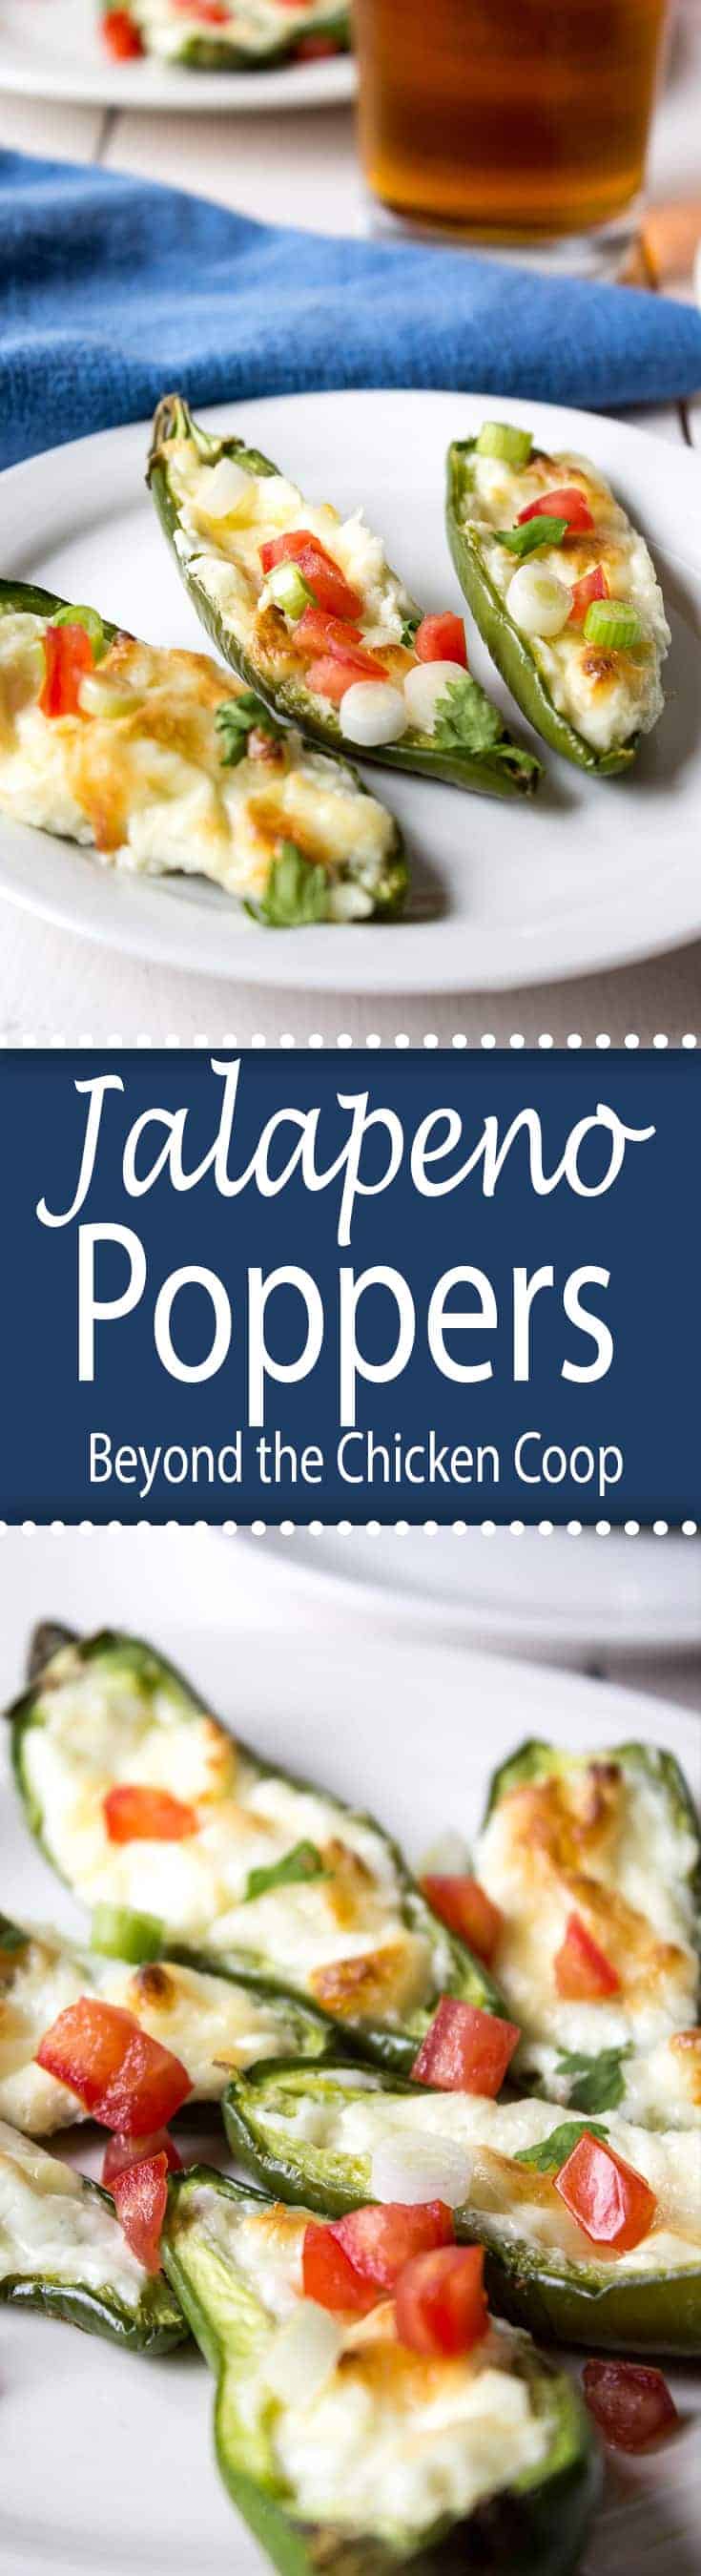 Jalapeno Poppers - Beyond The Chicken Coop